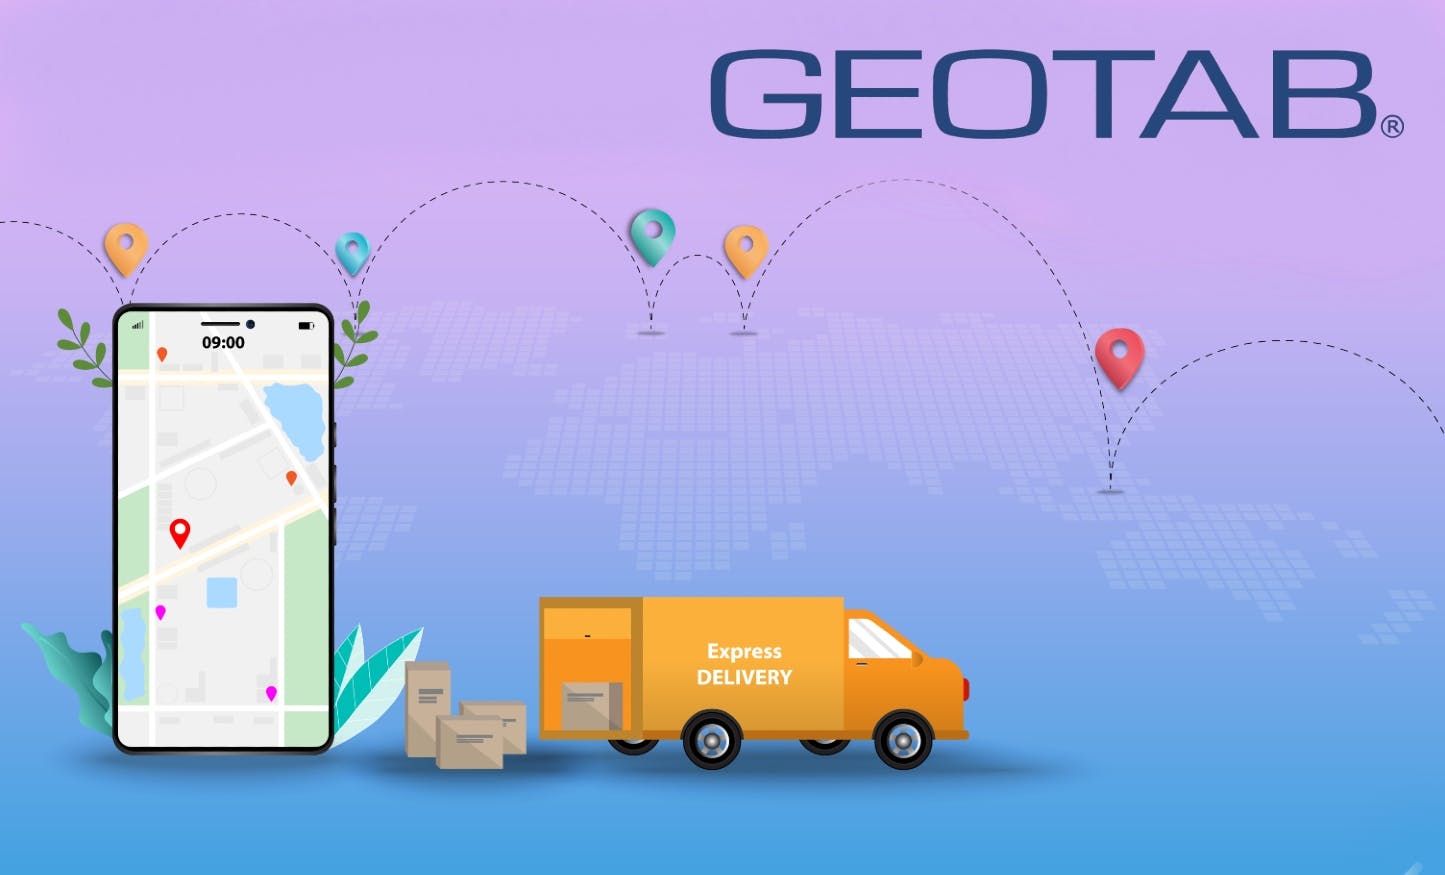 Geotab Fleet Management Review: Pros & Cons, Prices, Features, and More!